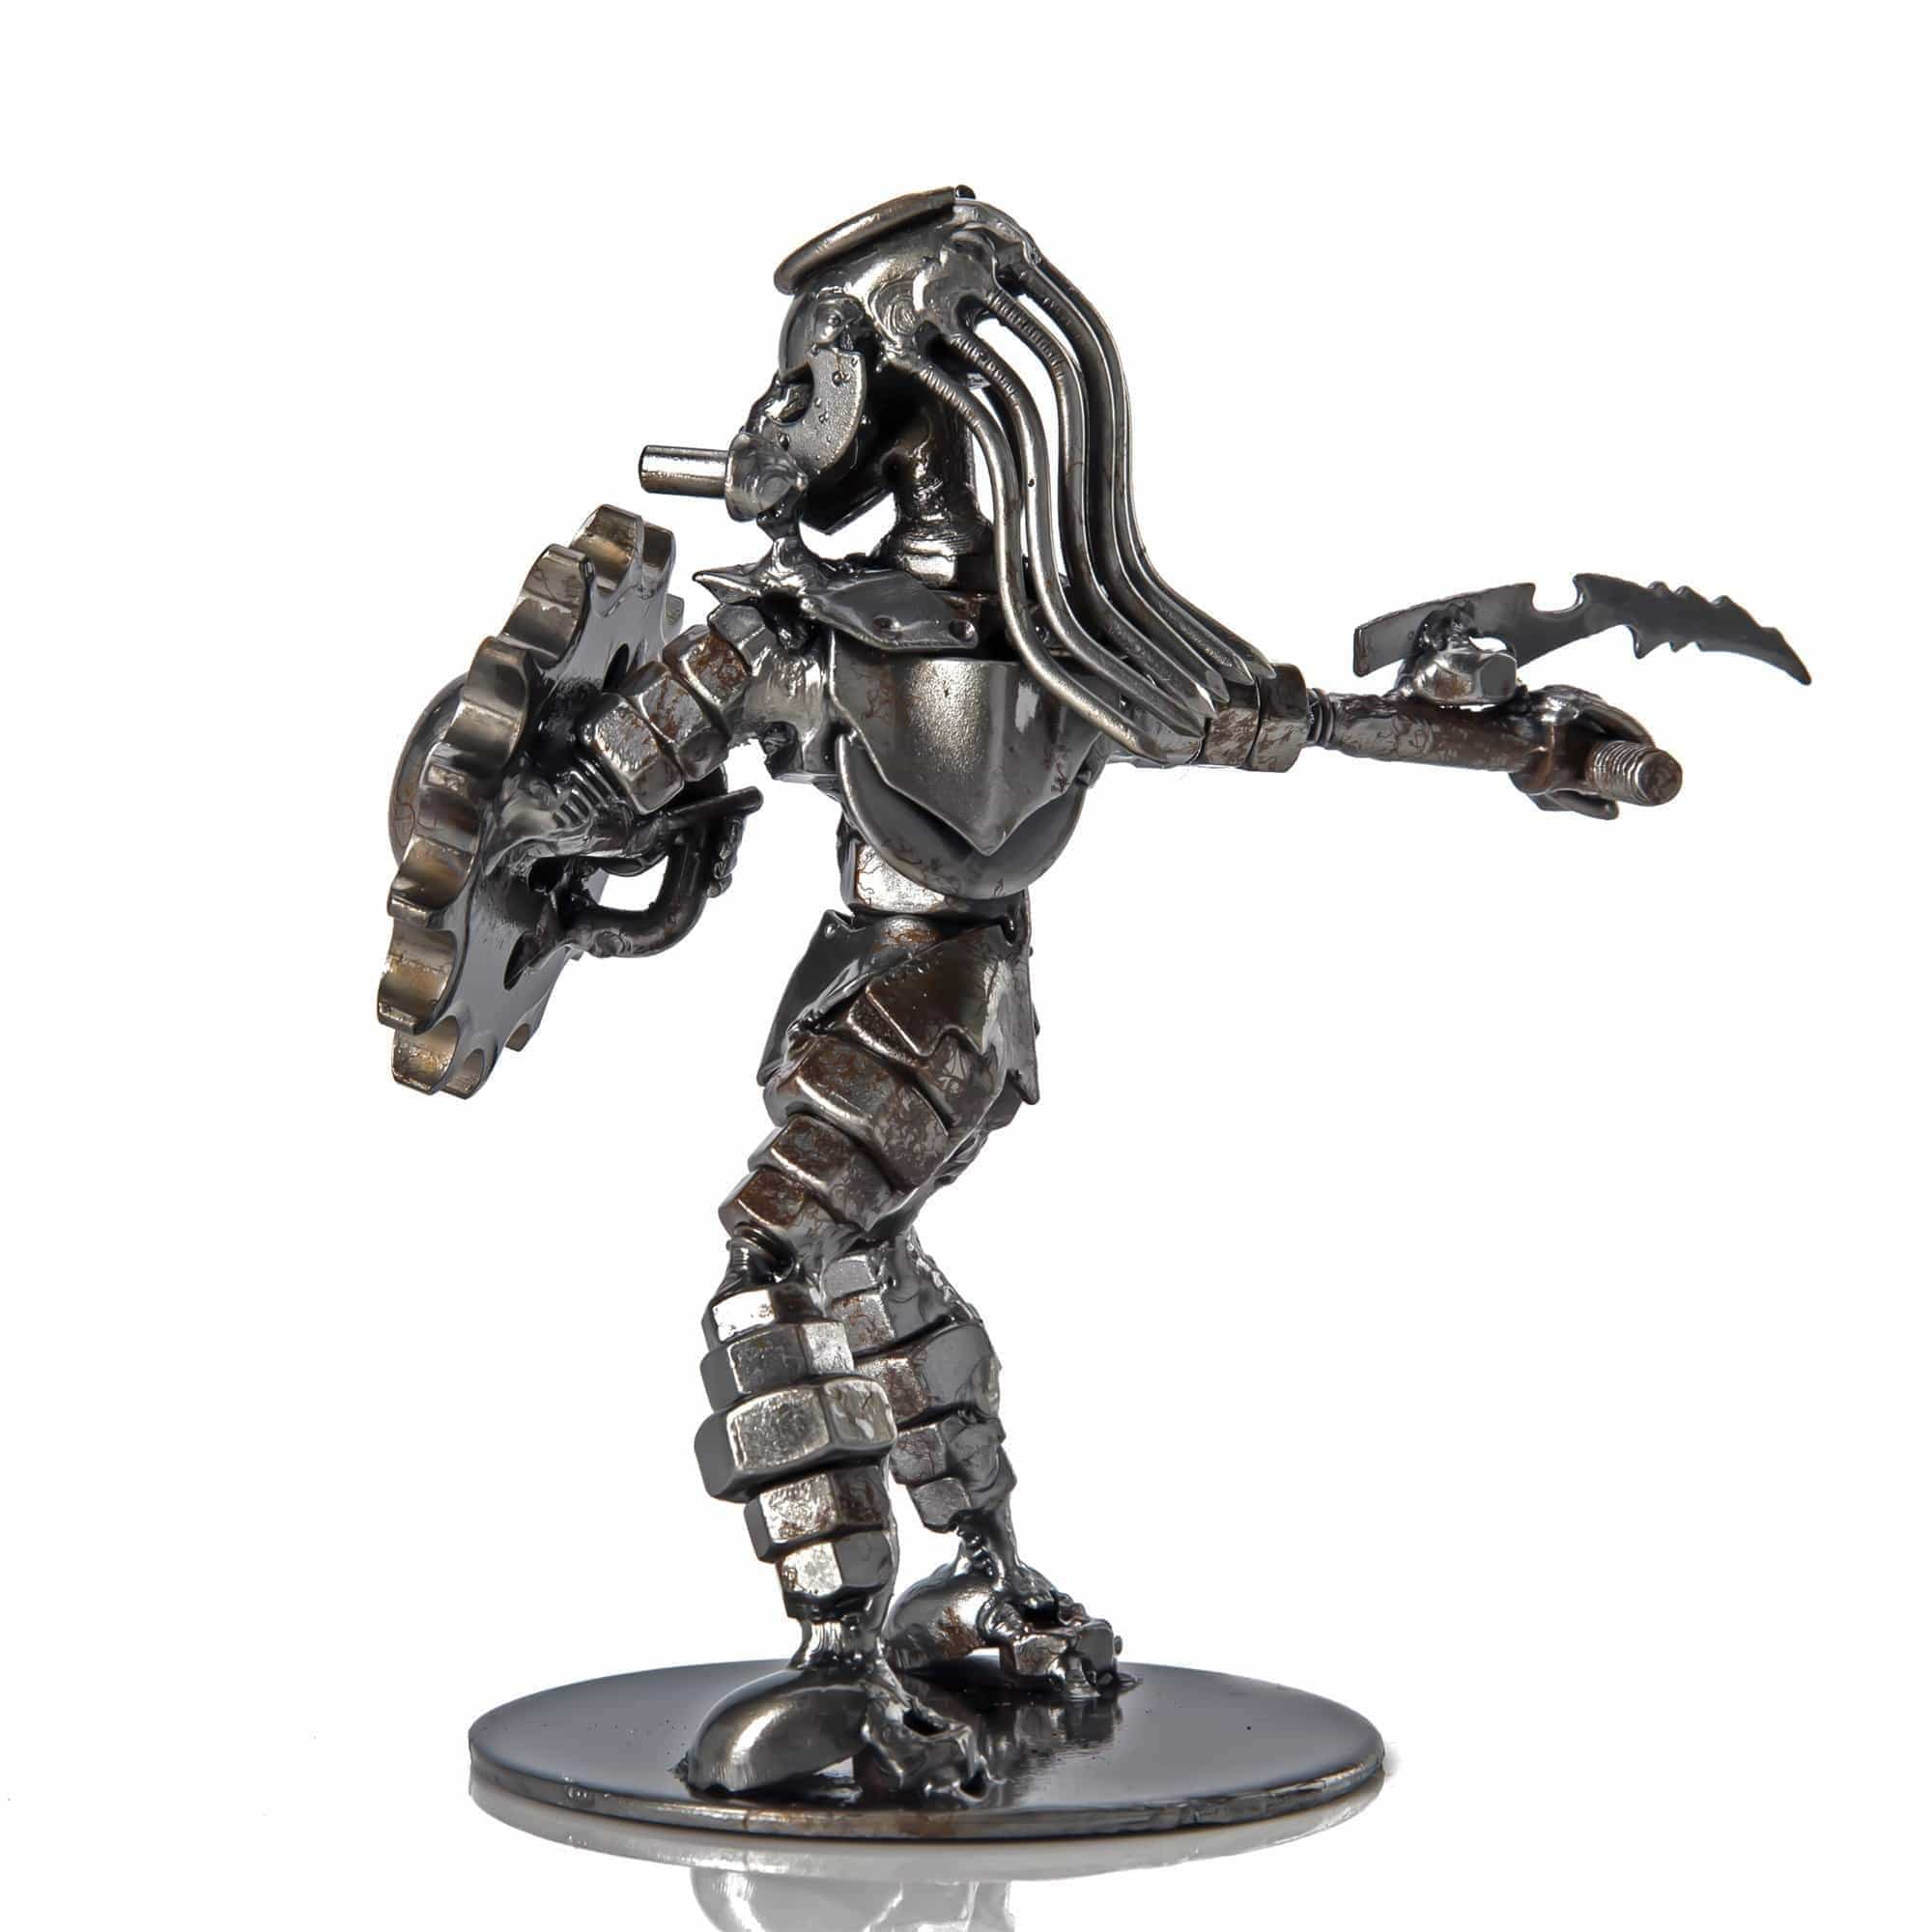 Kalifano Recycled Metal Art Predator with Sword and Shield Inspired Recycled Metal Sculpture RMS-250PA-N